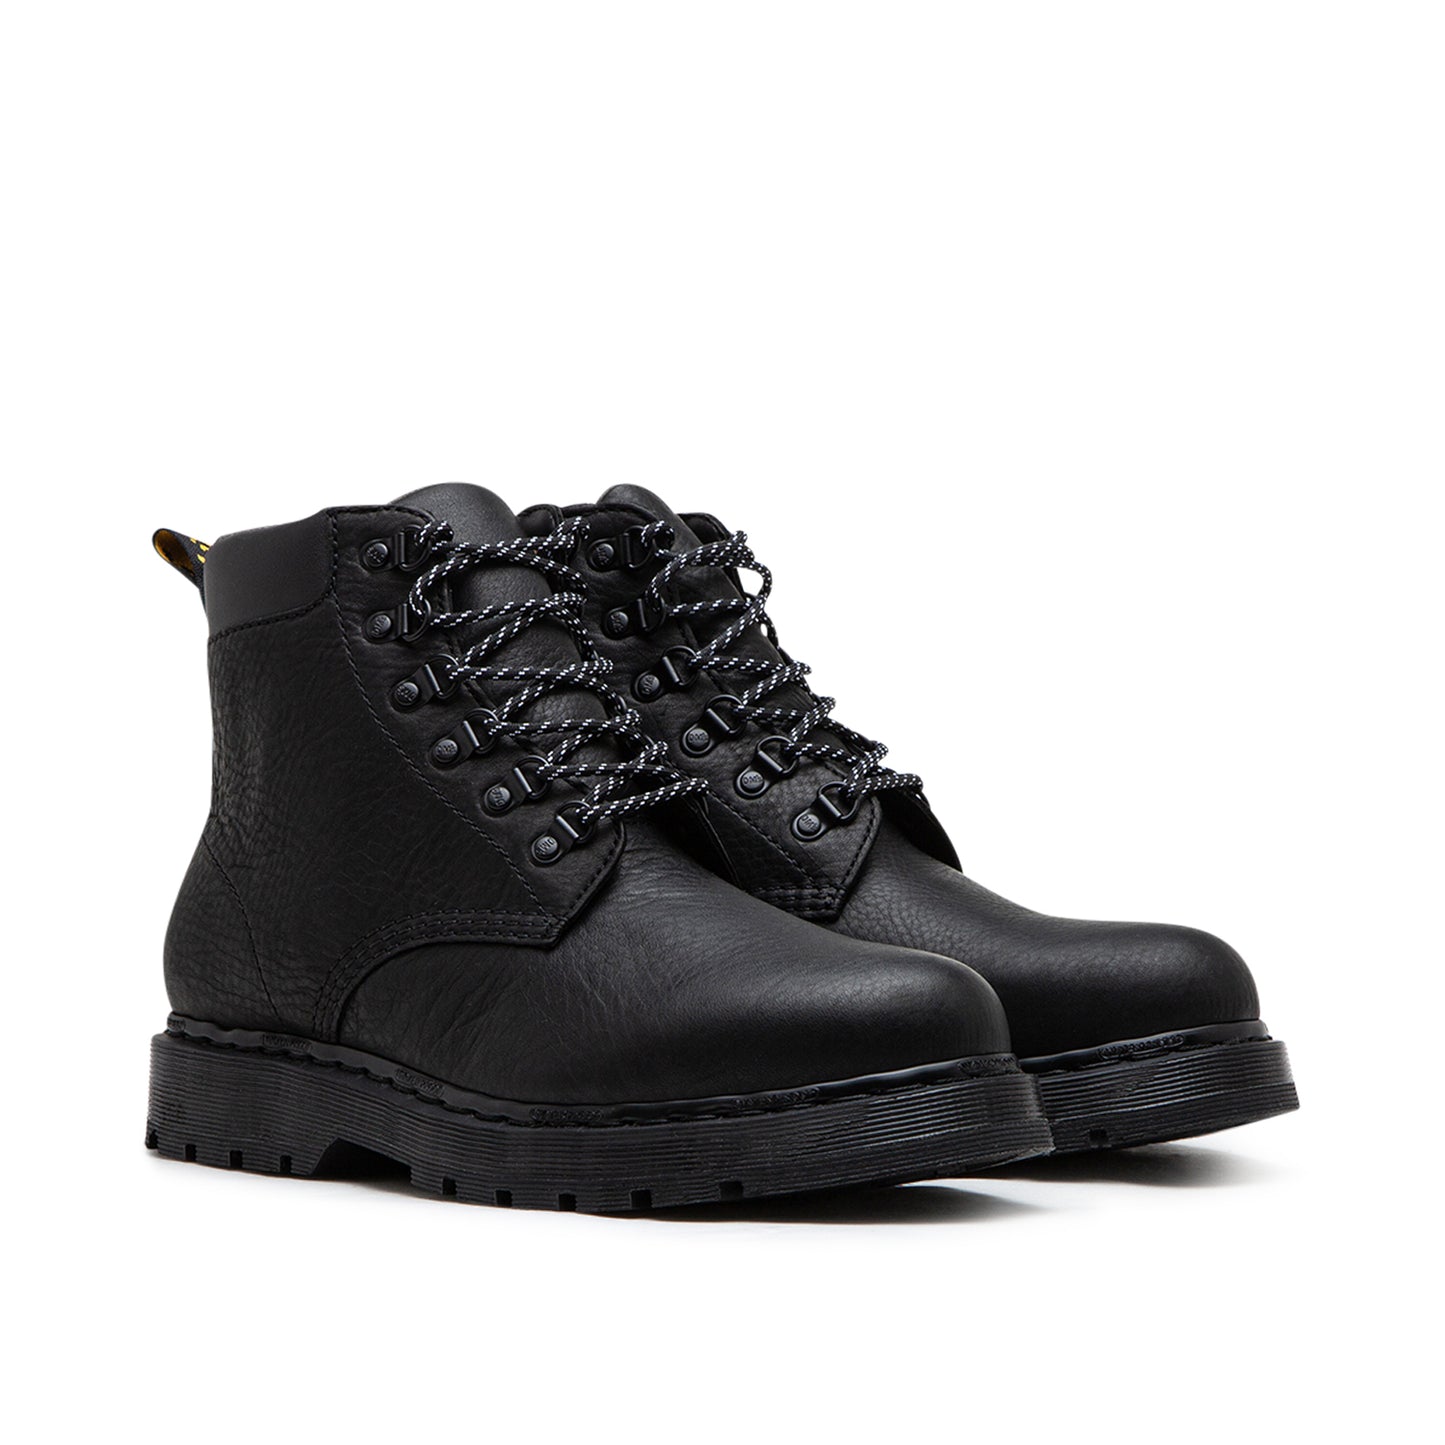 Dr. Martens 939 Padded Collar Ankle Boots (Schwarz)  - Allike Store